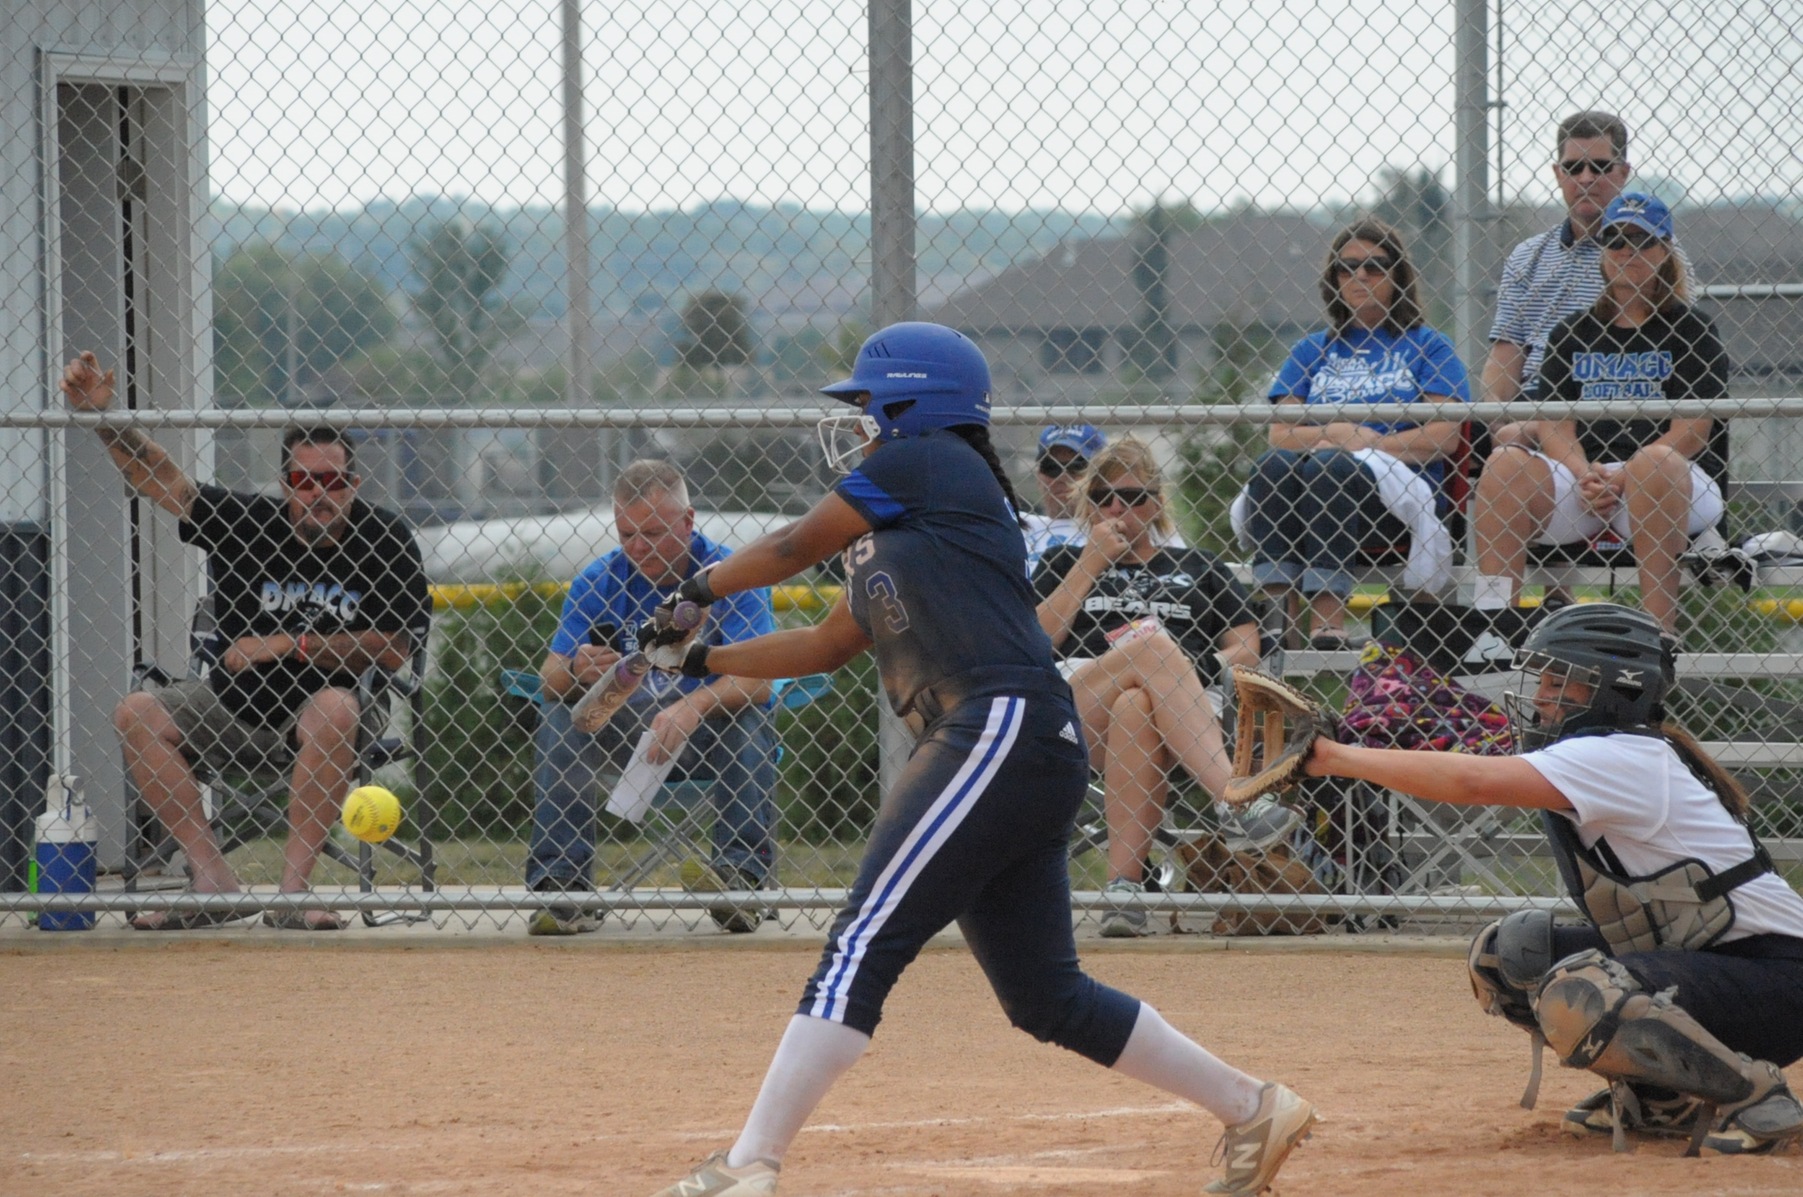 DMACC Softball Team Improves to 10-0 with Three Victories